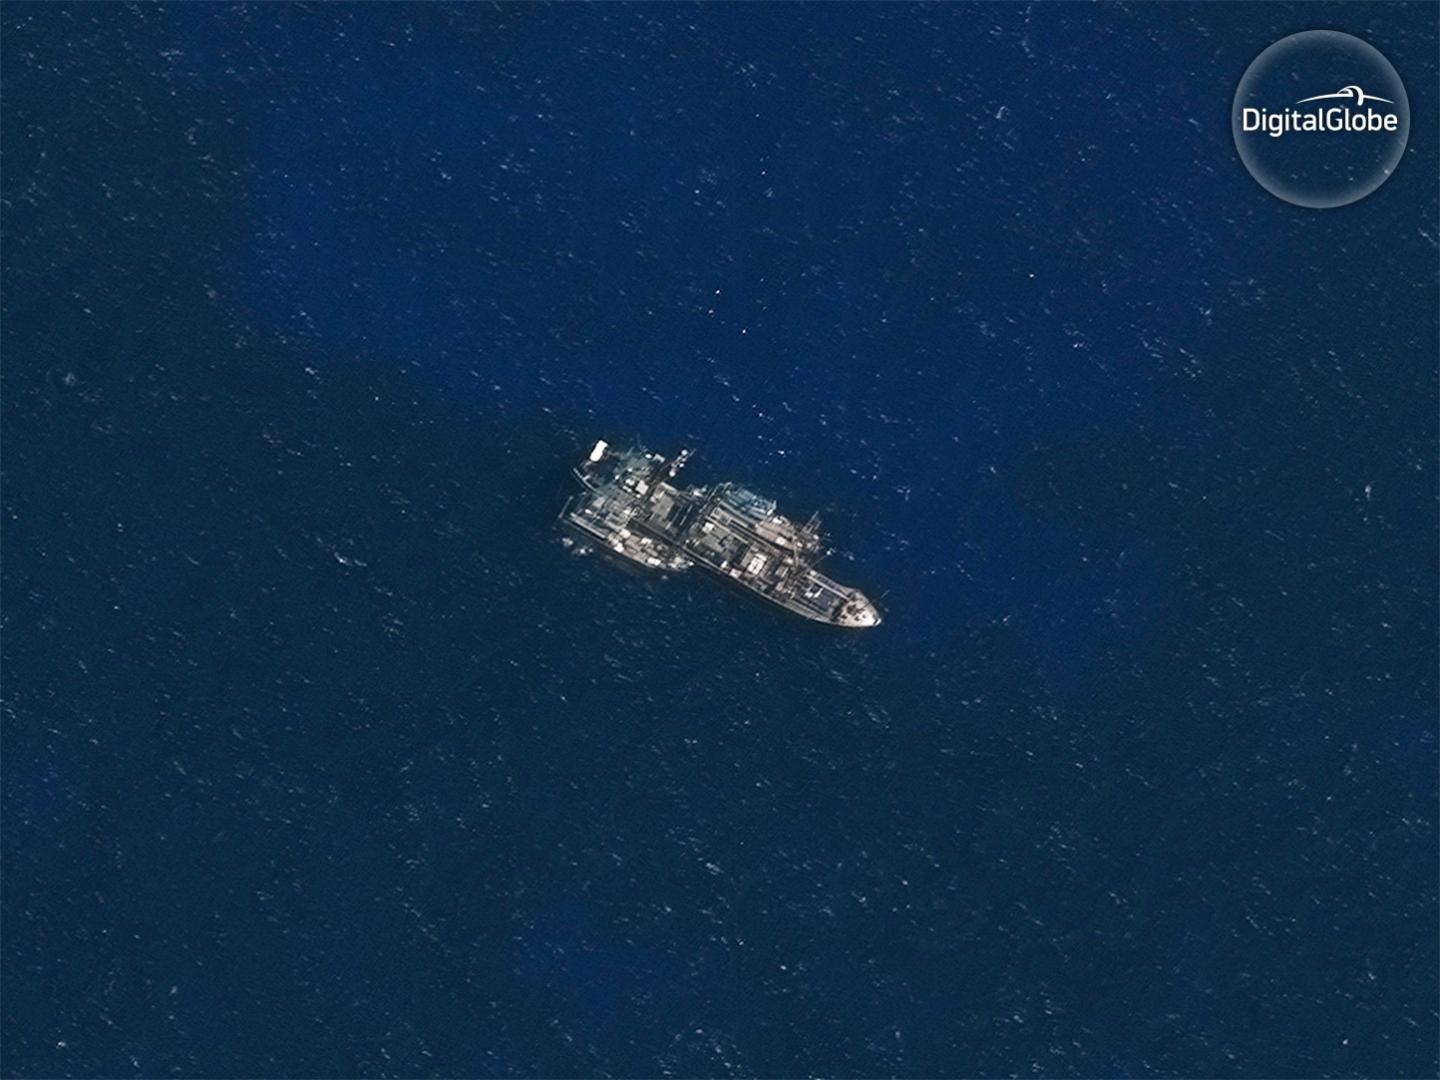 Image of Likely Transshipment by Thai Reefer Caught by Satellite